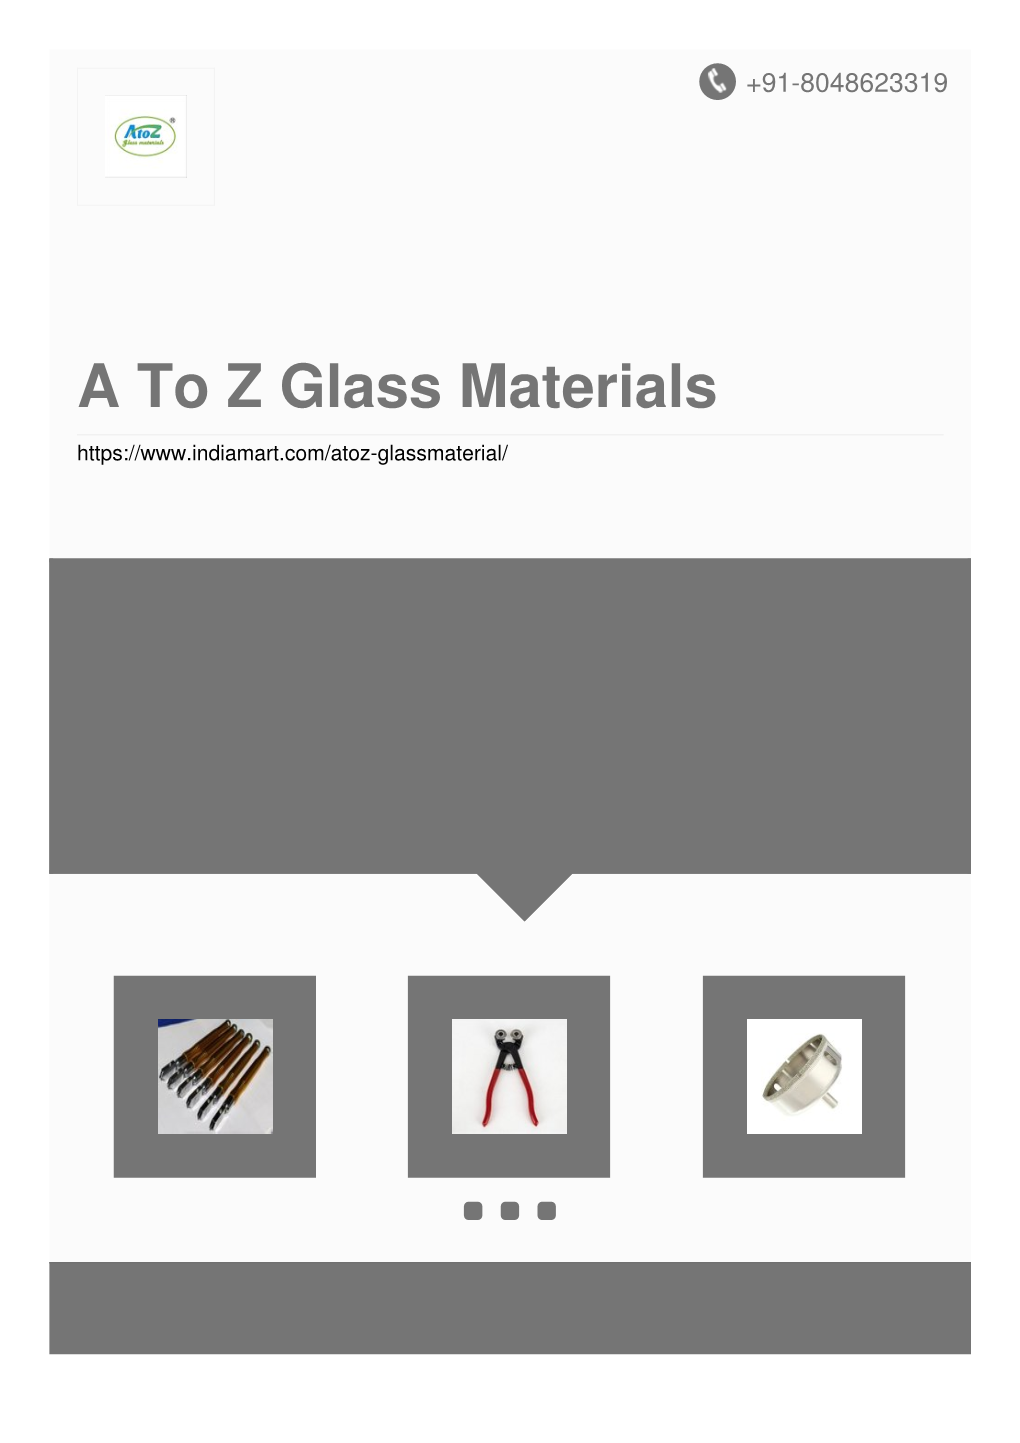 A to Z Glass Materials About Us